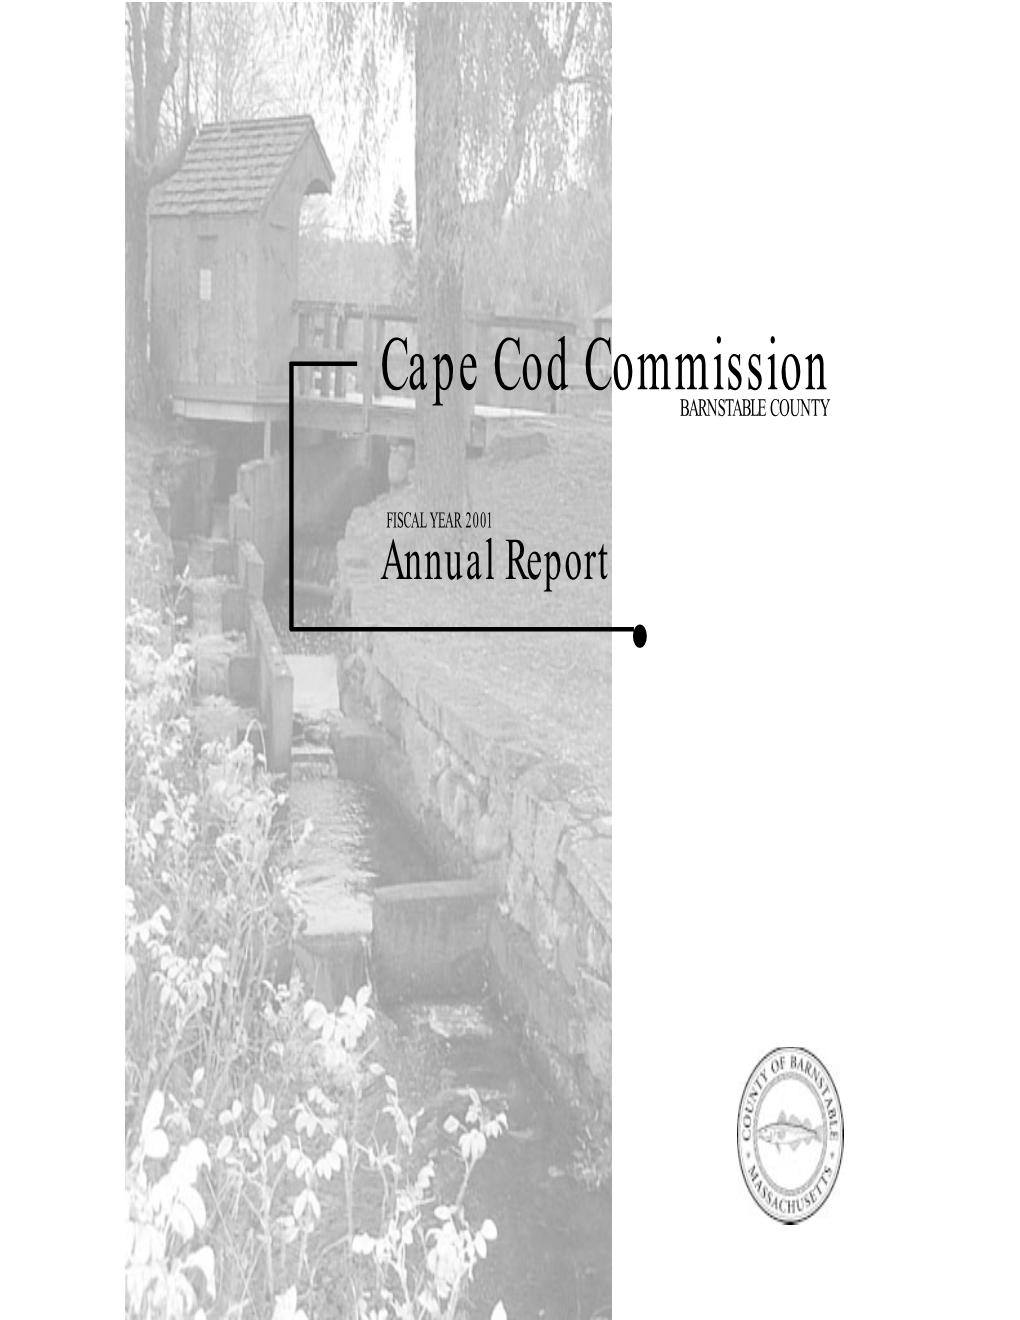 Cape Cod Commission Annual Report Fiscal Year 2001